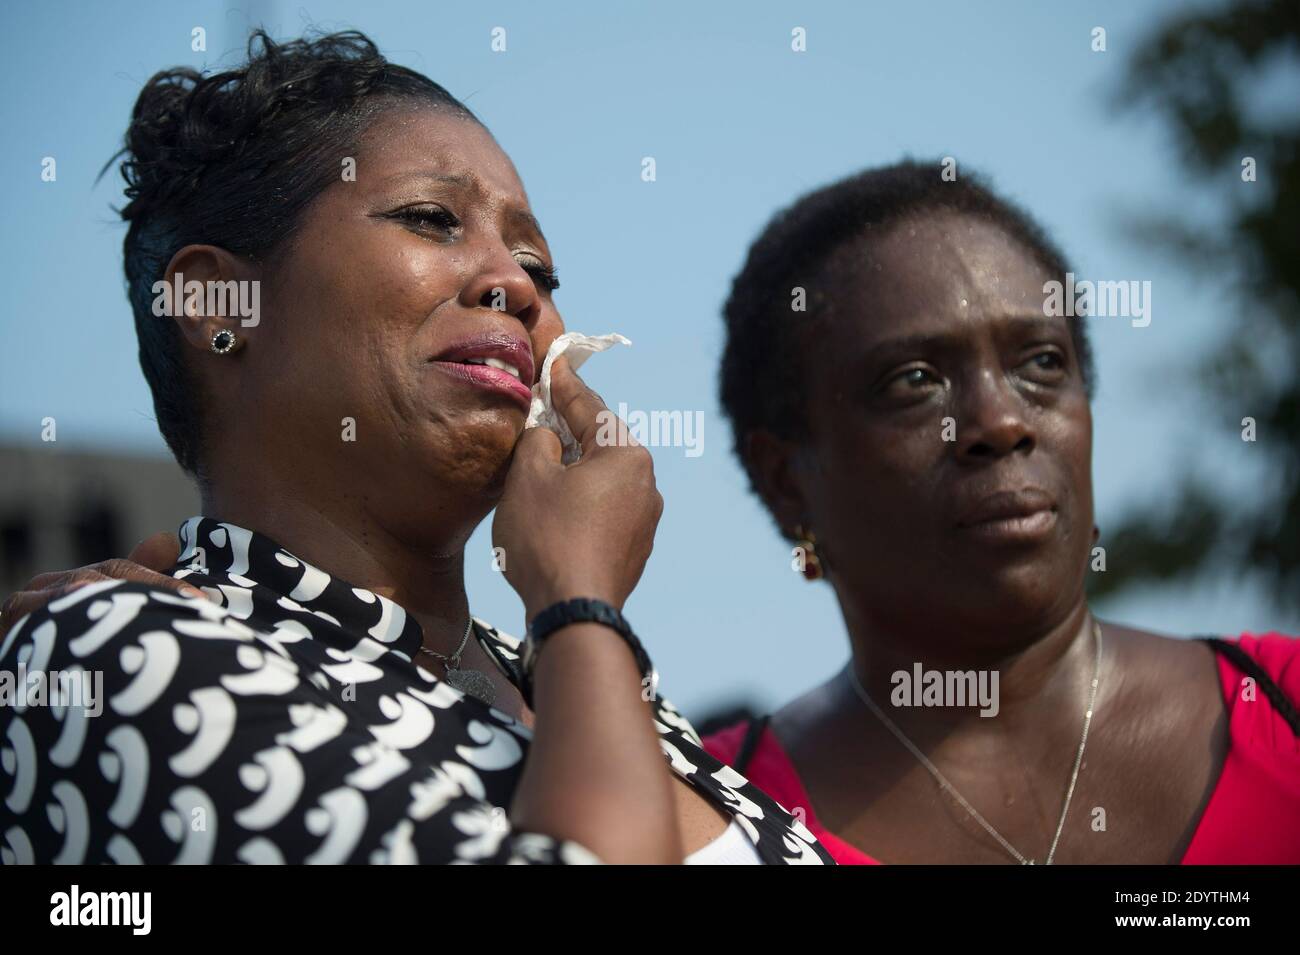 A woman becomes emotional during a remembrance ceremony for the 12th anniversary of the 9/11 terrorist attacks, at the Pentagon in Arlington, Virginia, USA on September 11, 2013. Photo by Kevin Dietsch/UPI/Pool/ABACAPRESS.COM Stock Photo